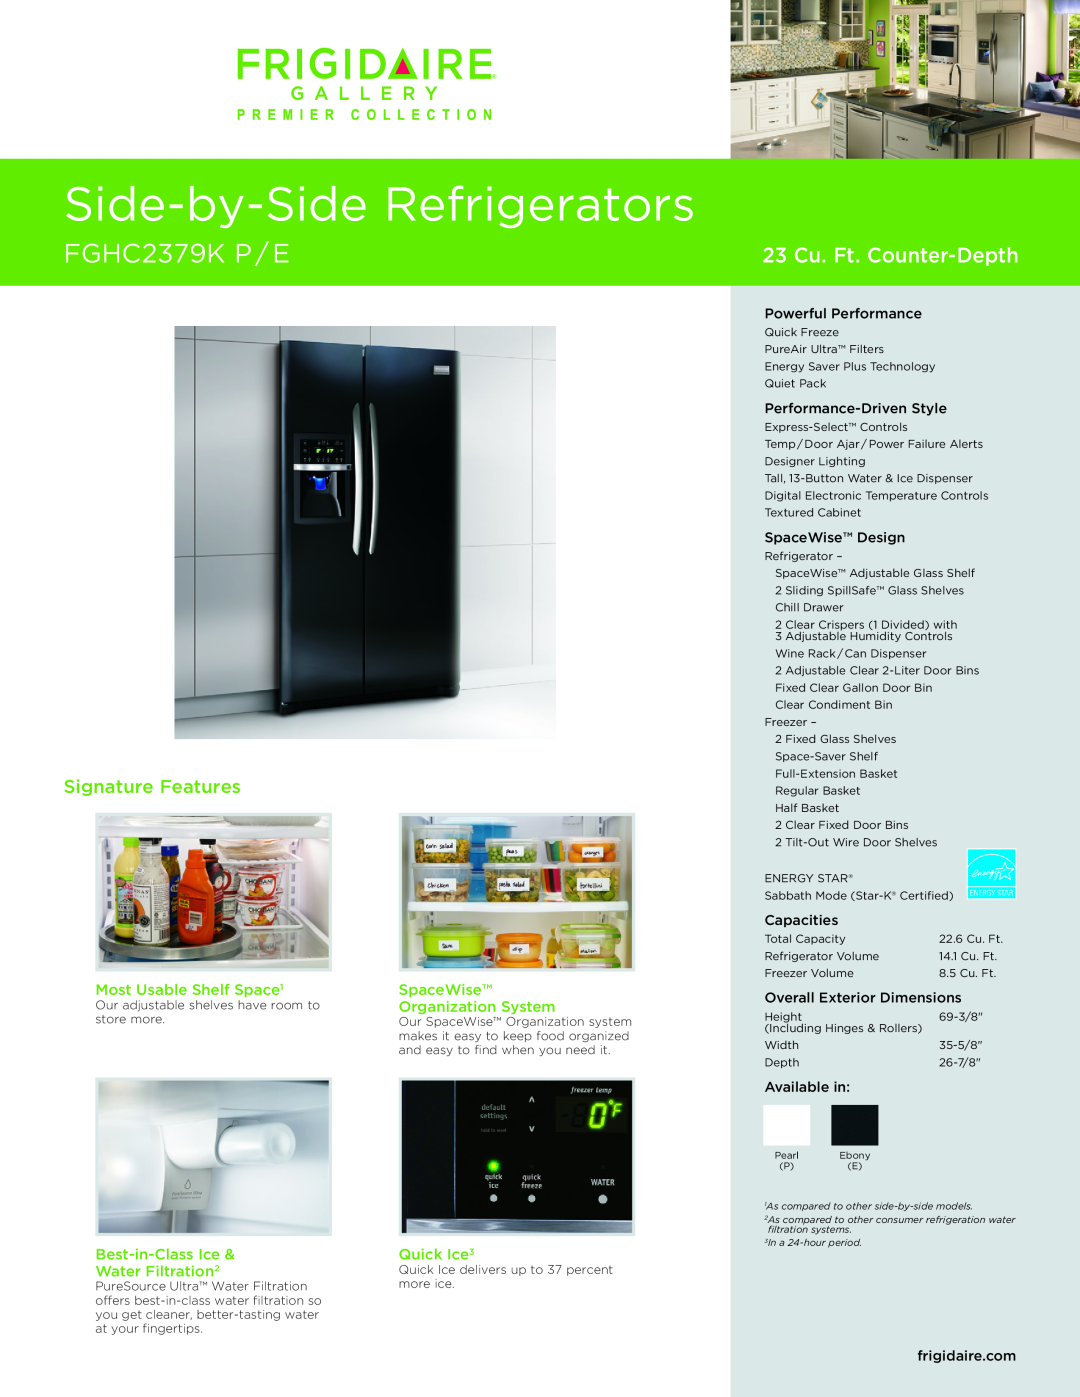 Frigidaire FGHC2379KE dimensions Most Usable Shelf Space1, SpaceWise, Organization System, Best-in-ClassIce, Quick Ice3 